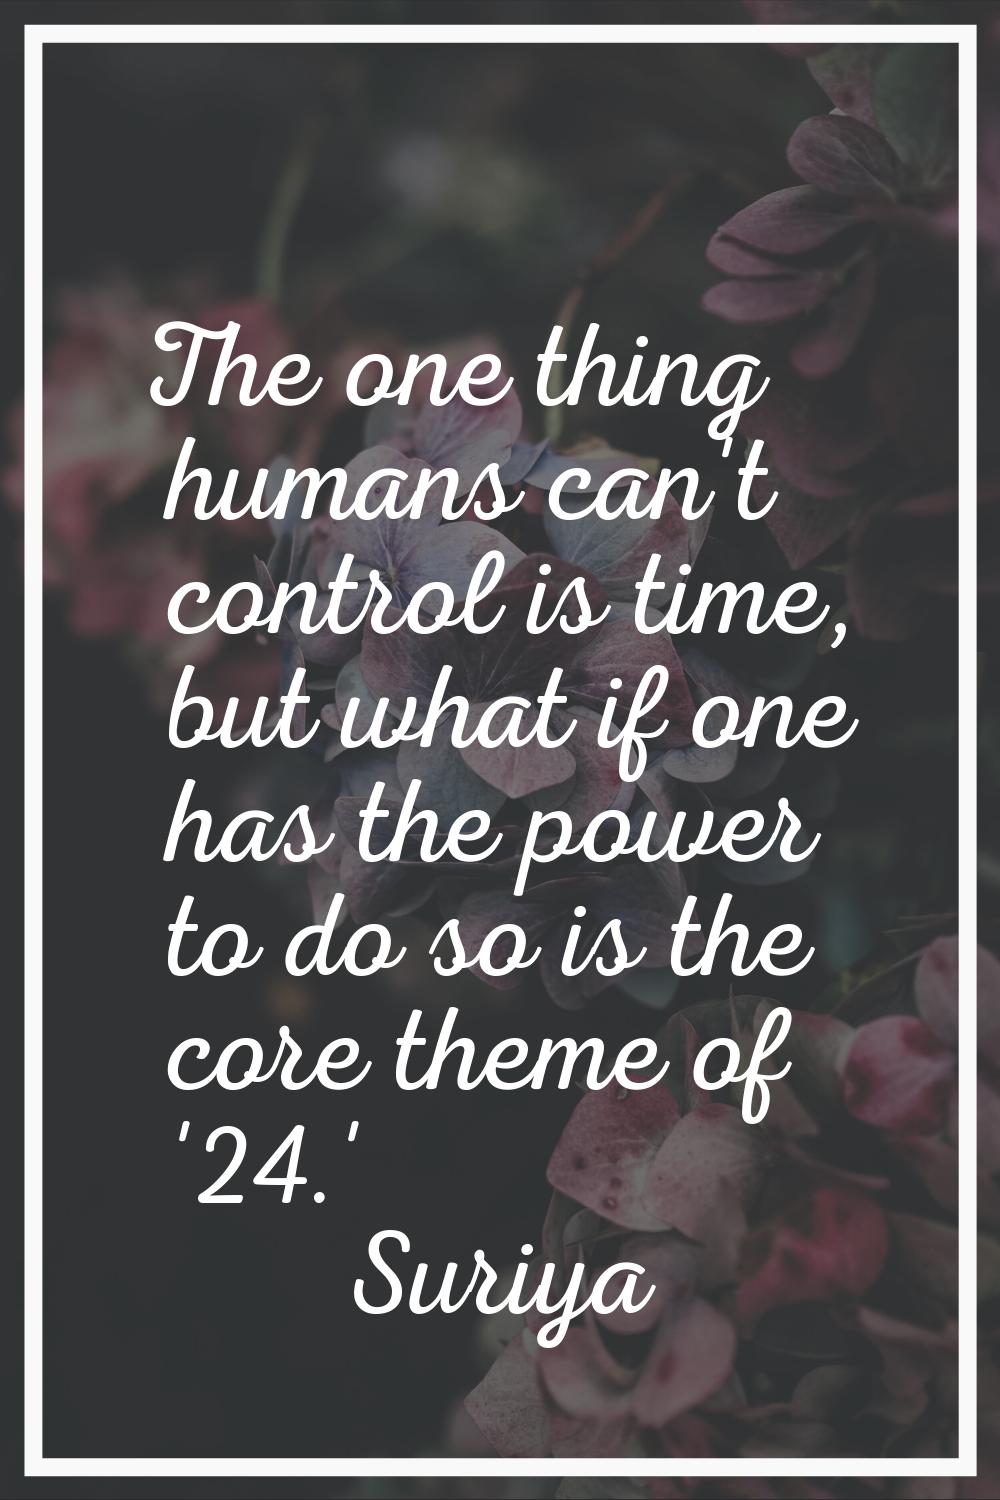 The one thing humans can't control is time, but what if one has the power to do so is the core them